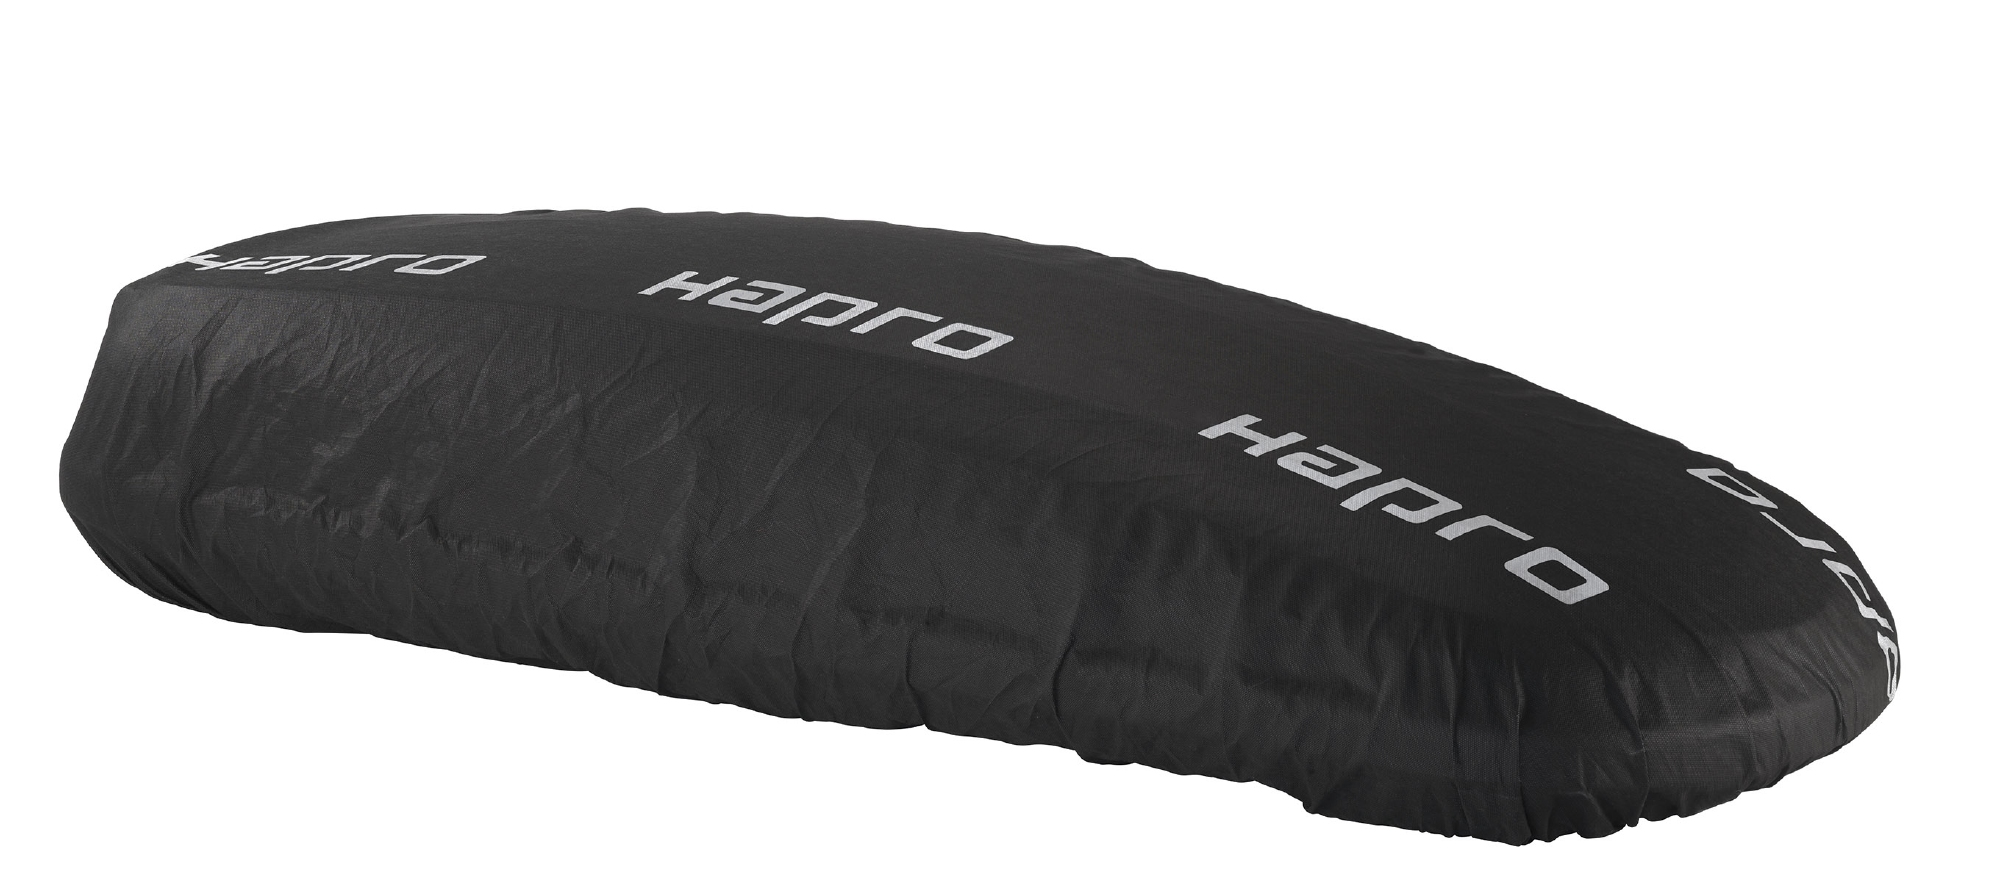 Hapro Roof Box Cover Xl